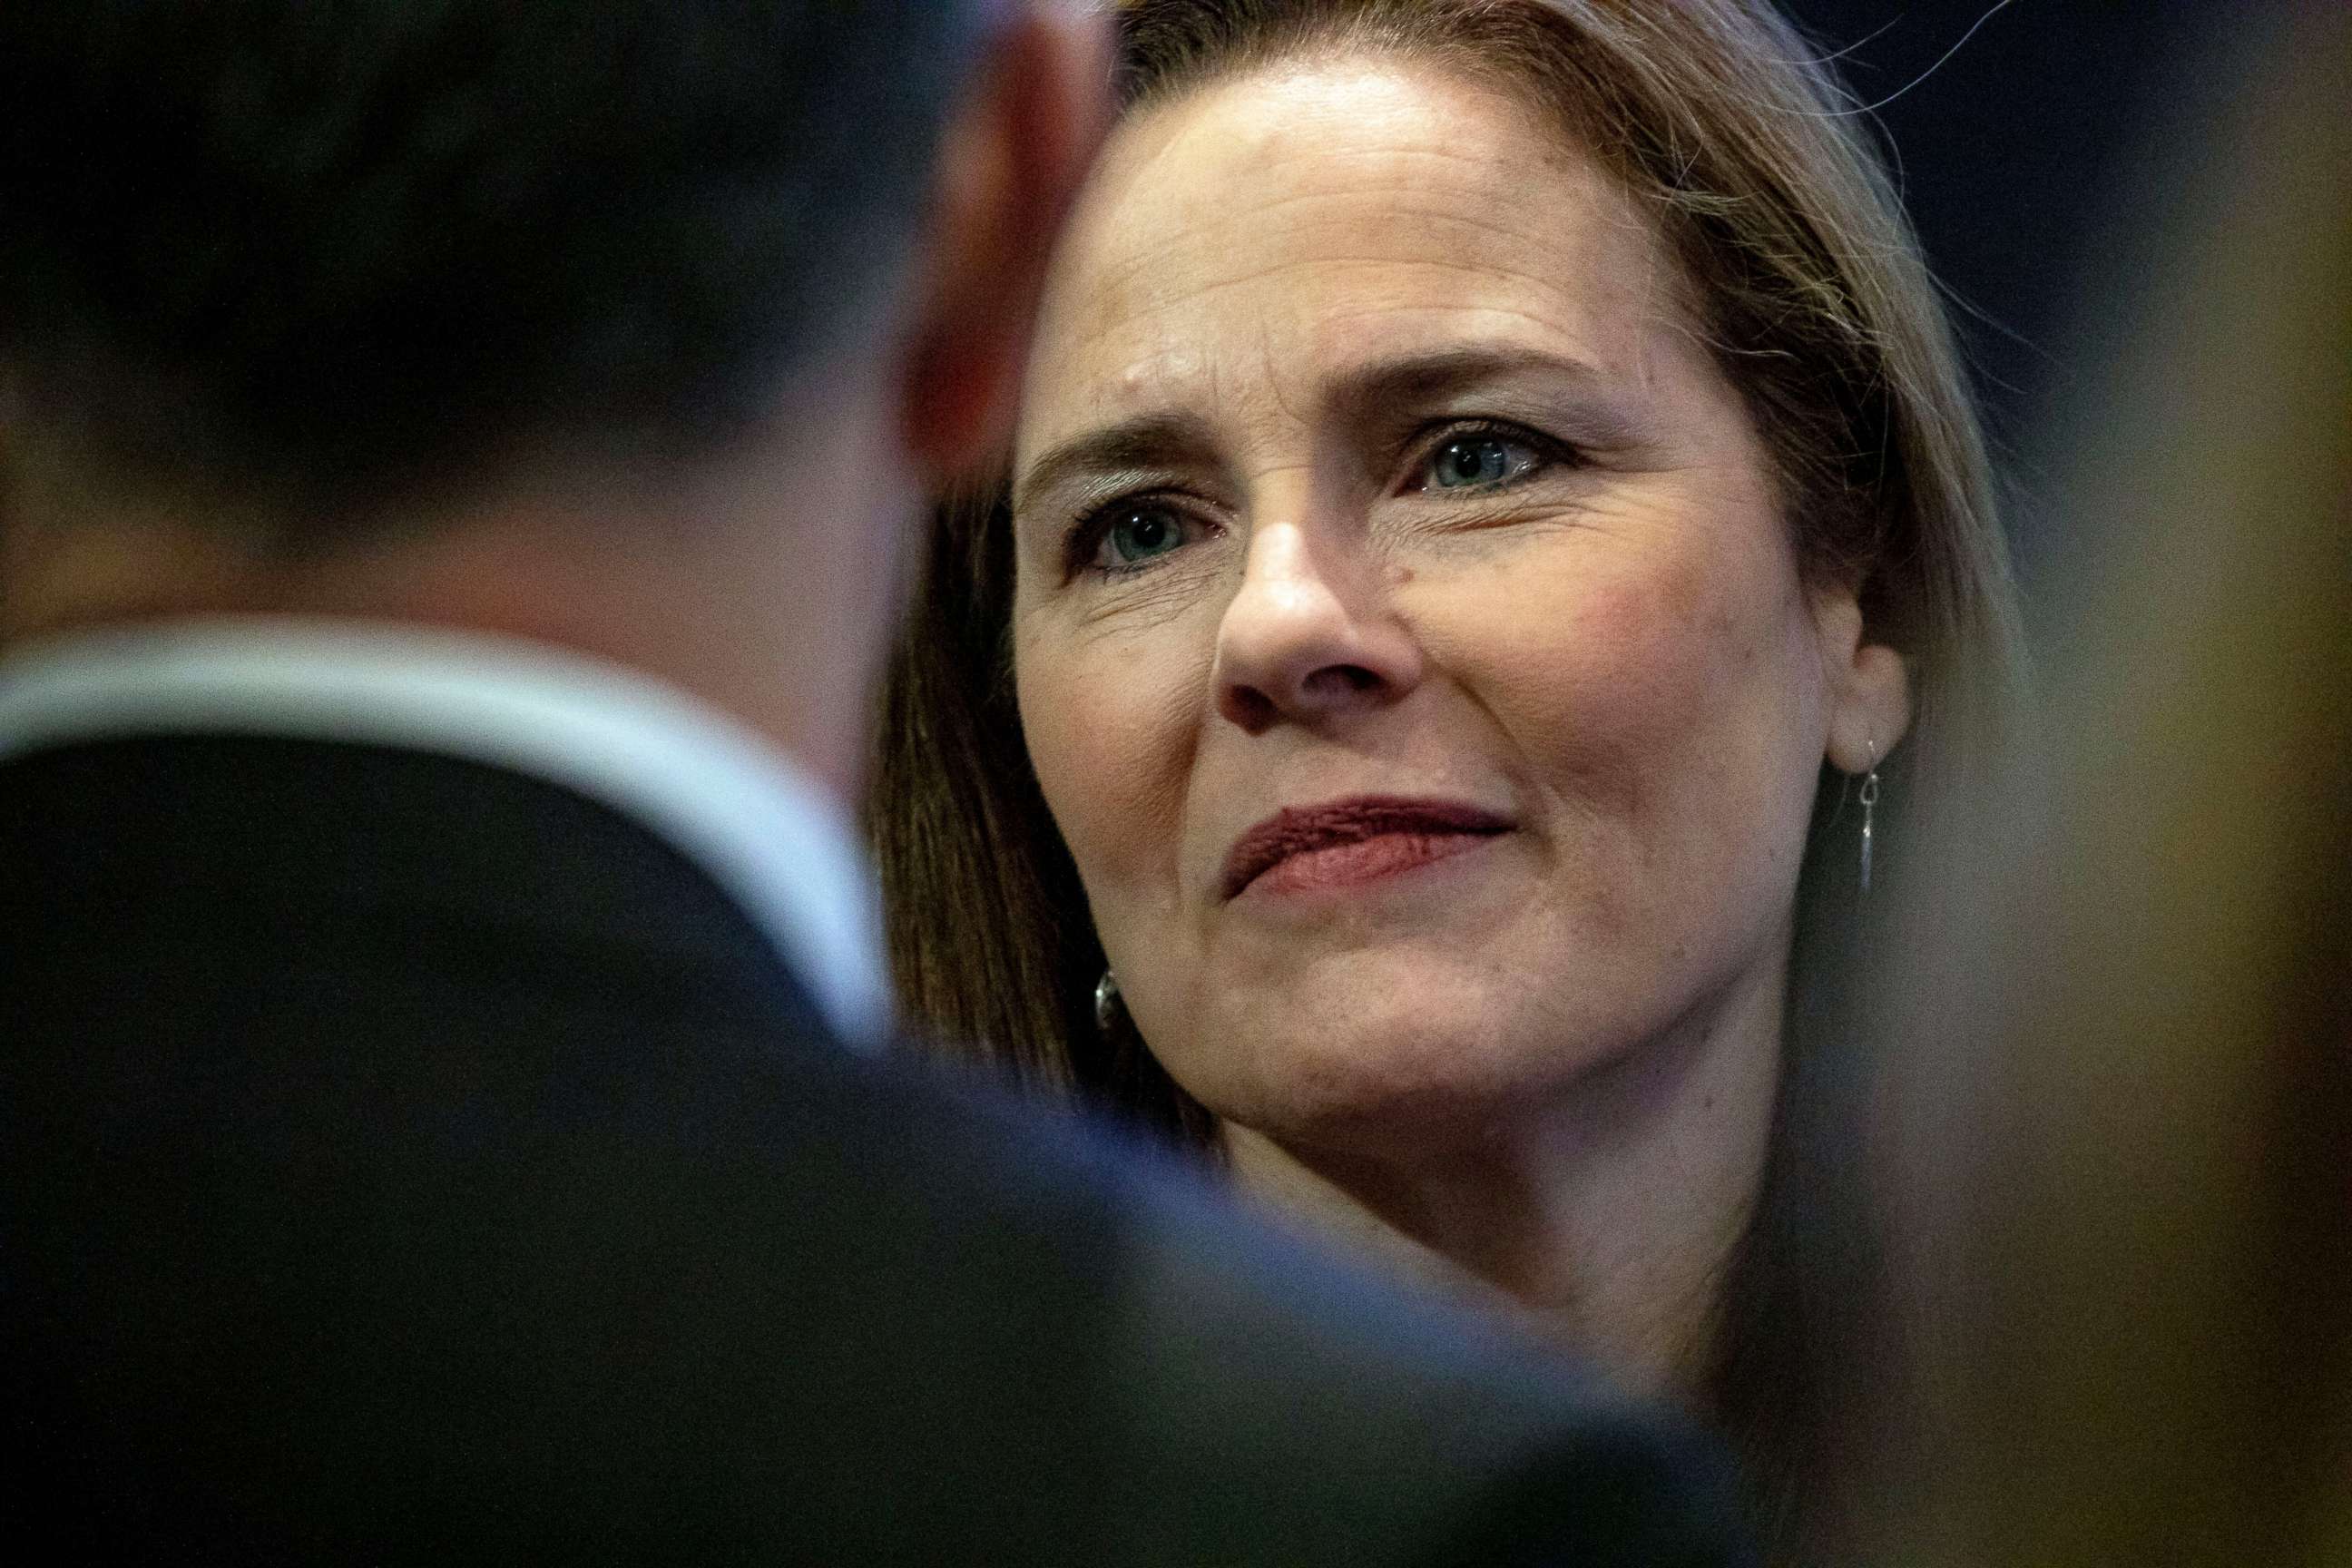 PHOTO: Judge Amy Coney Barrett attends the Federalists Society's 2019 National Lawyers Convention in Washington, Nov. 15, 2019.